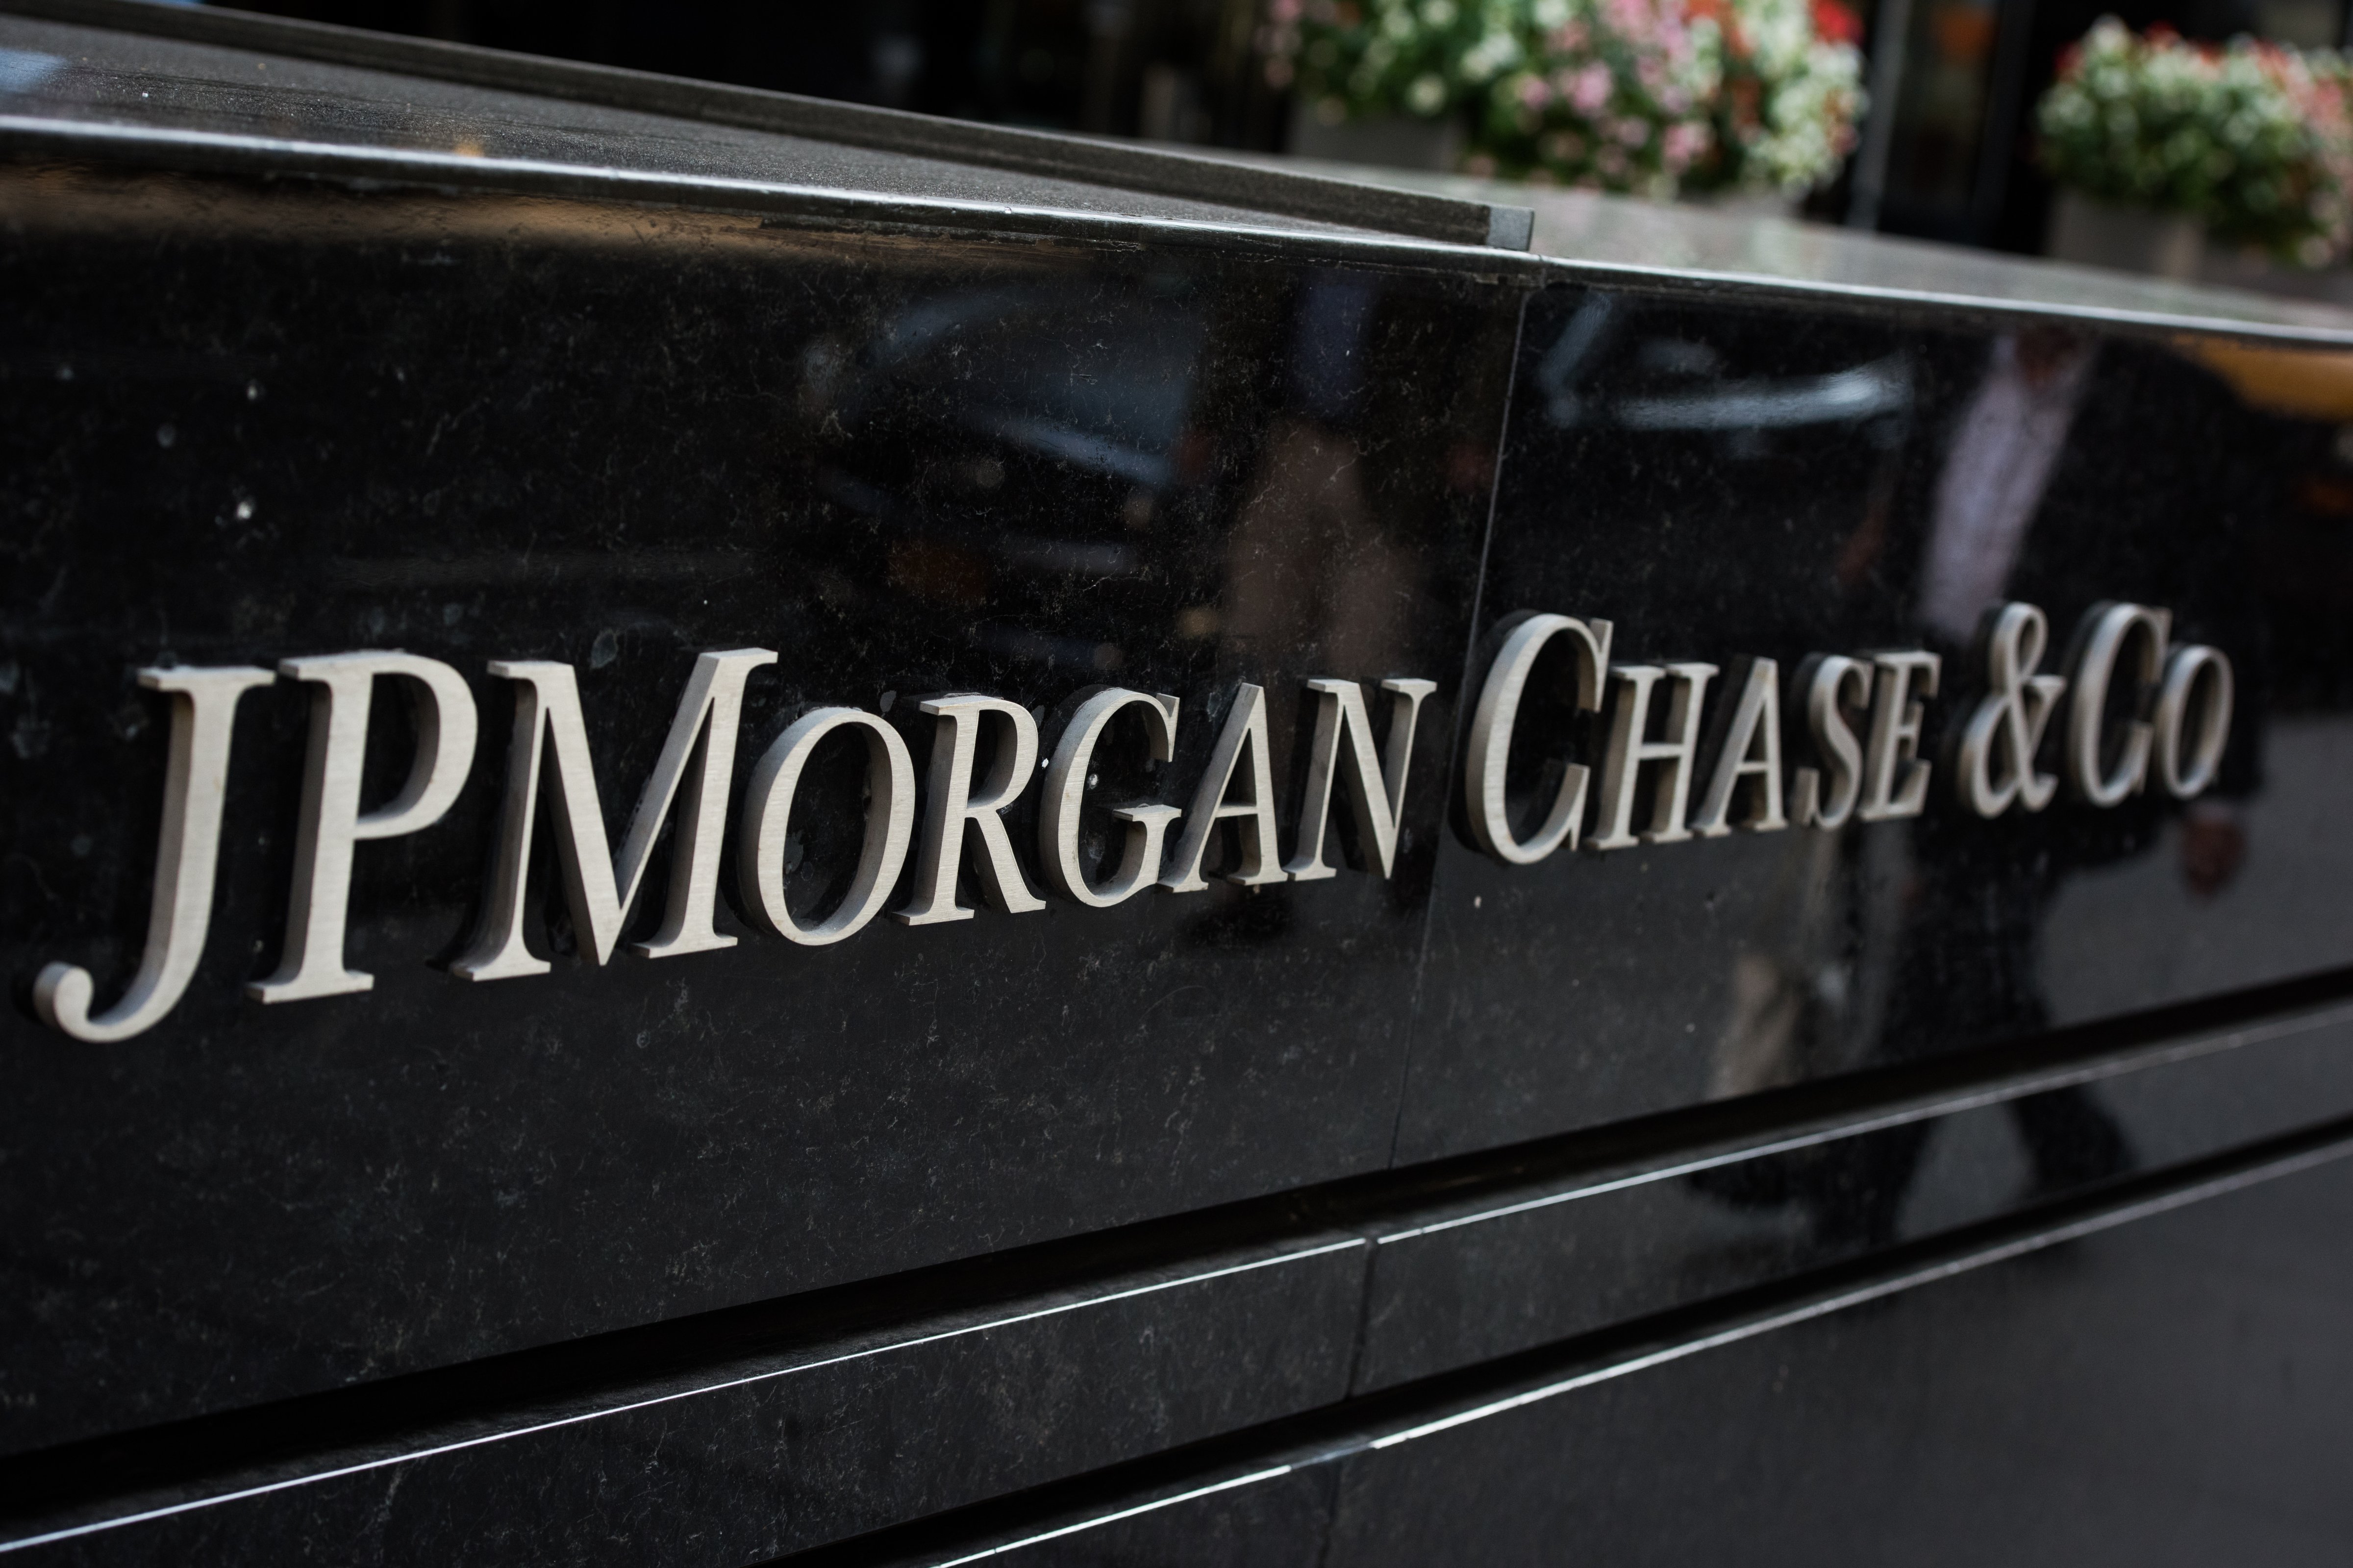 JPMorgan Chase &amp; Co. signage is displayed outside the company's Park Avenue office building in New York, U.S., on Friday, Oct. 7, 2016. JPMorgan Chase &amp; Co. is scheduled to release earnings figures on October 14. Photographer: Mark Kauzlarich/Bloomberg via Getty Images (Bloomberg&mdash;Bloomberg via Getty Images)